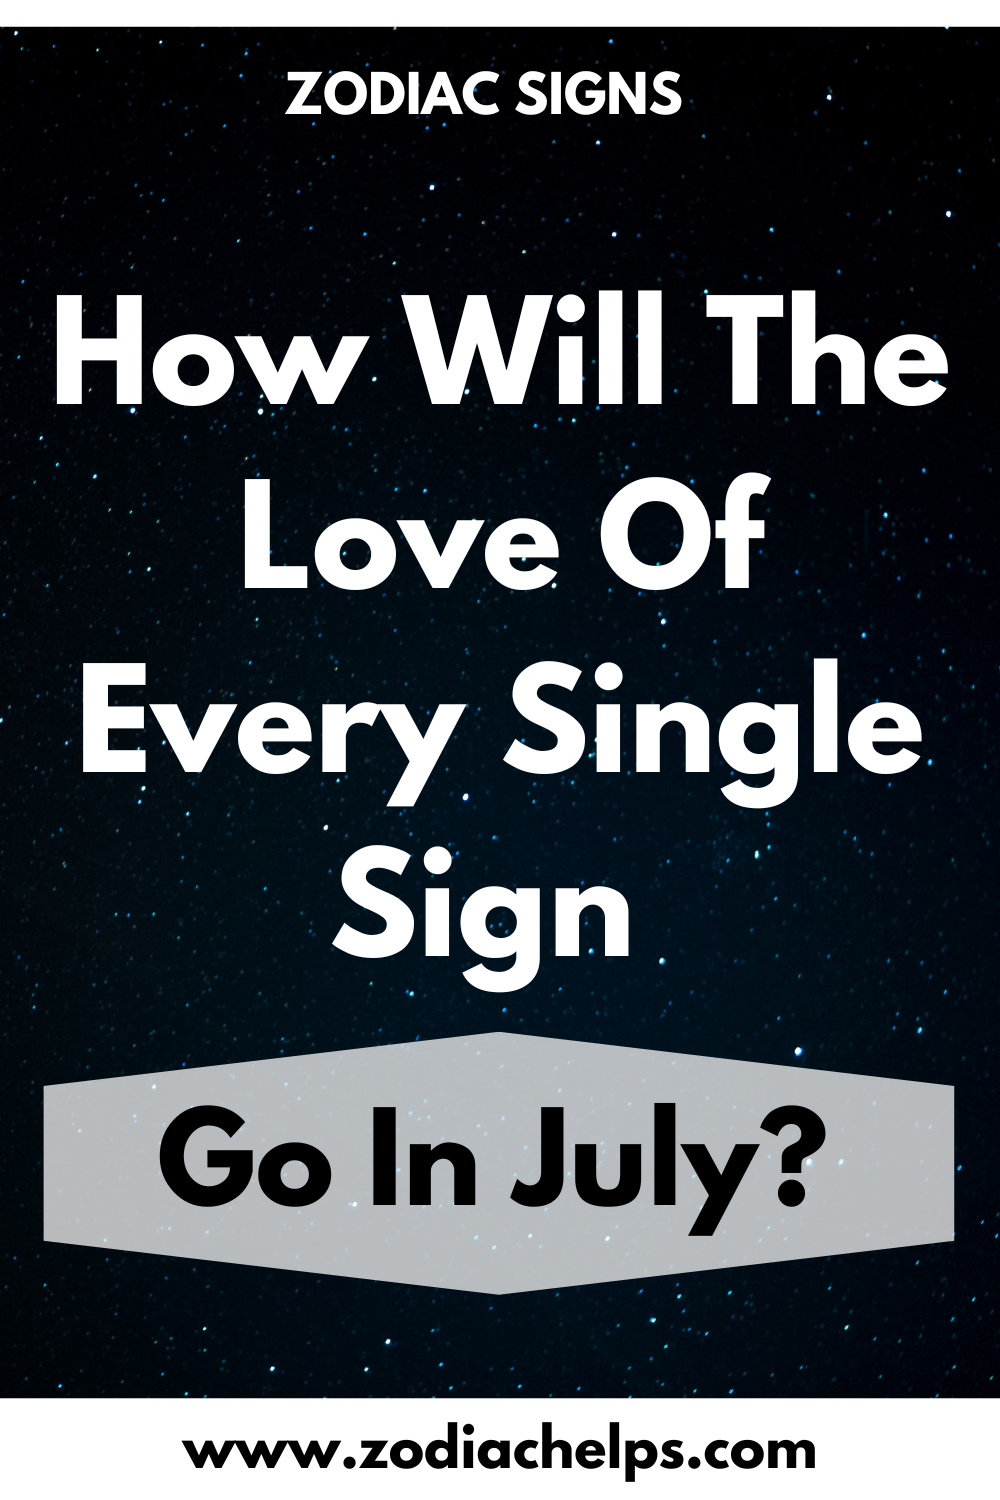 How Will The Love Of Every Single Sign Go In July?